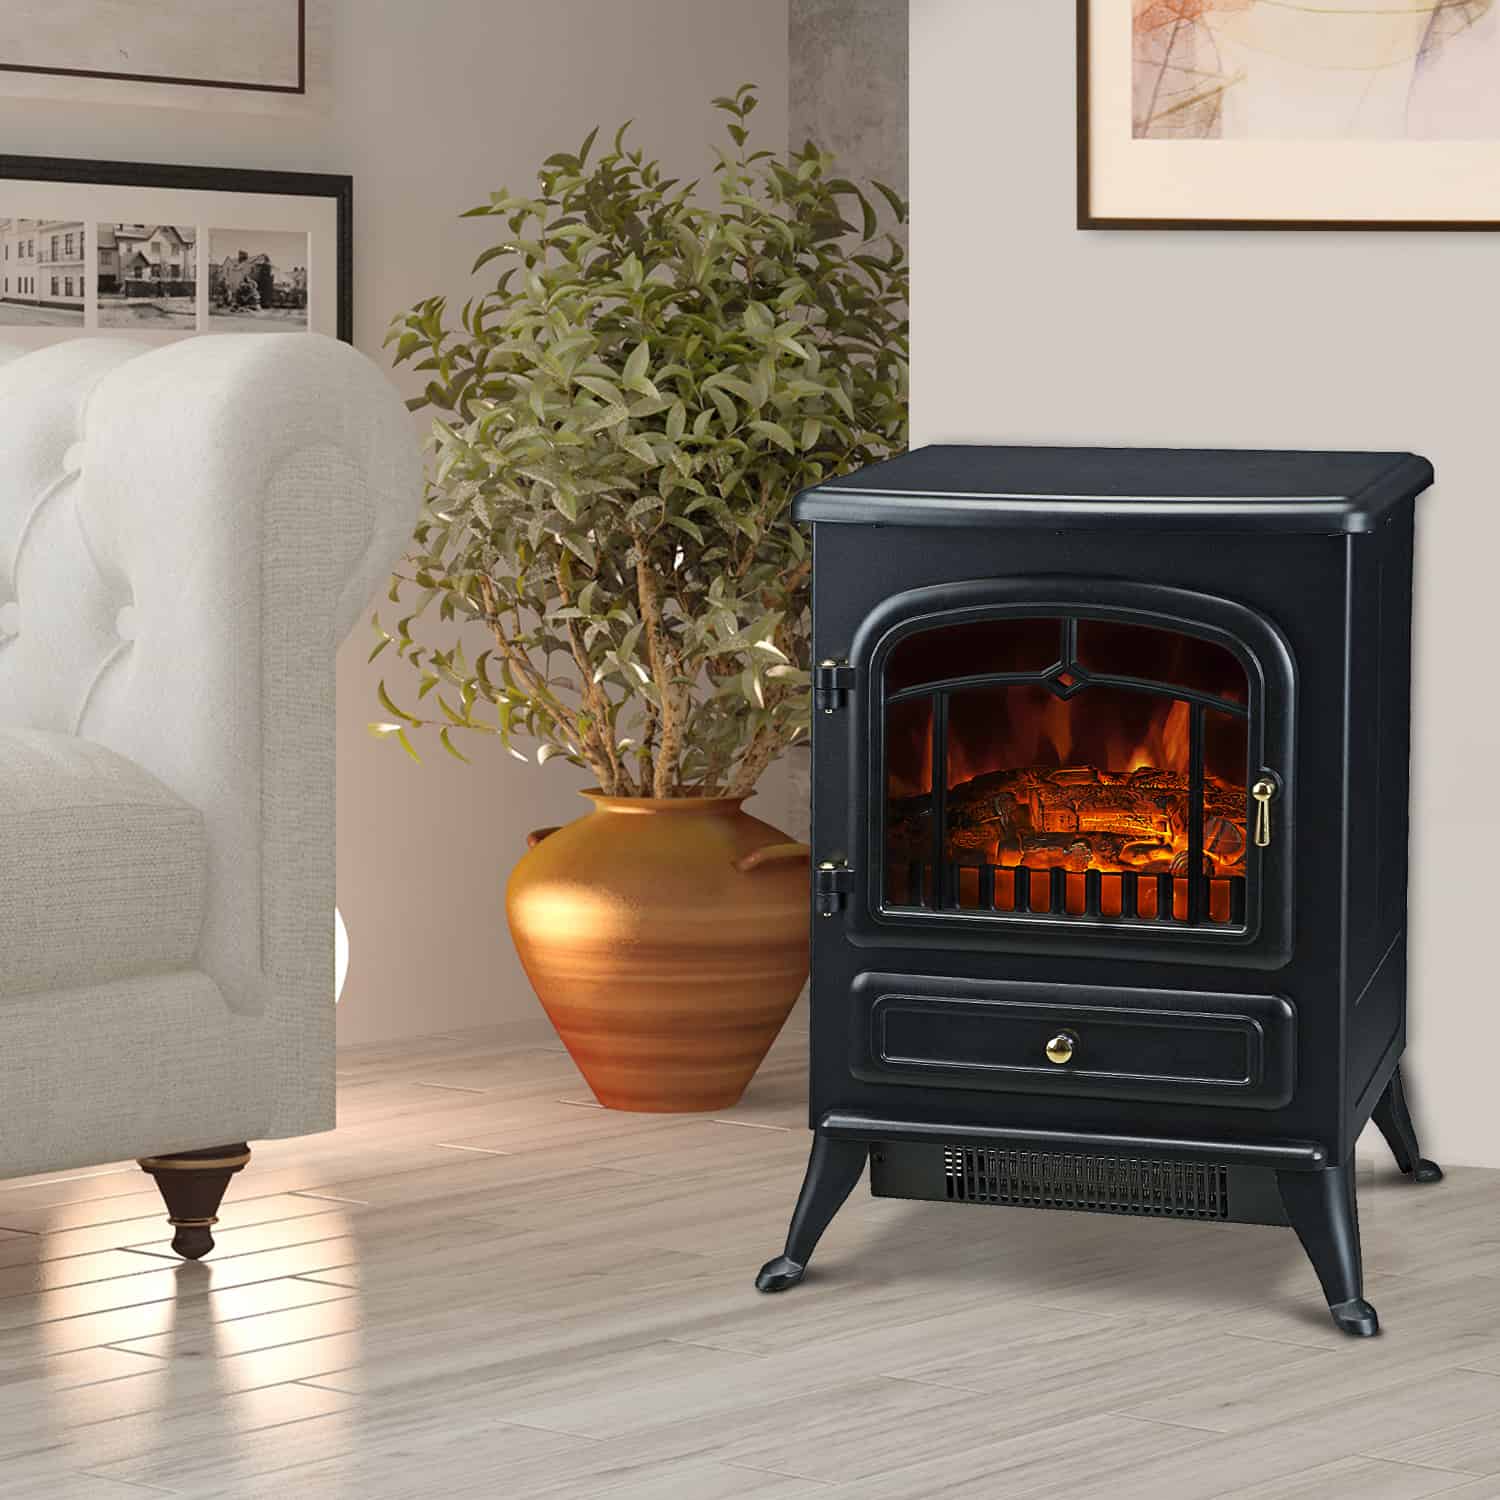 HOMCOM Freestanding Electric Fireplace Heater With Realistic Flames 21quot H 1500W Black 1 